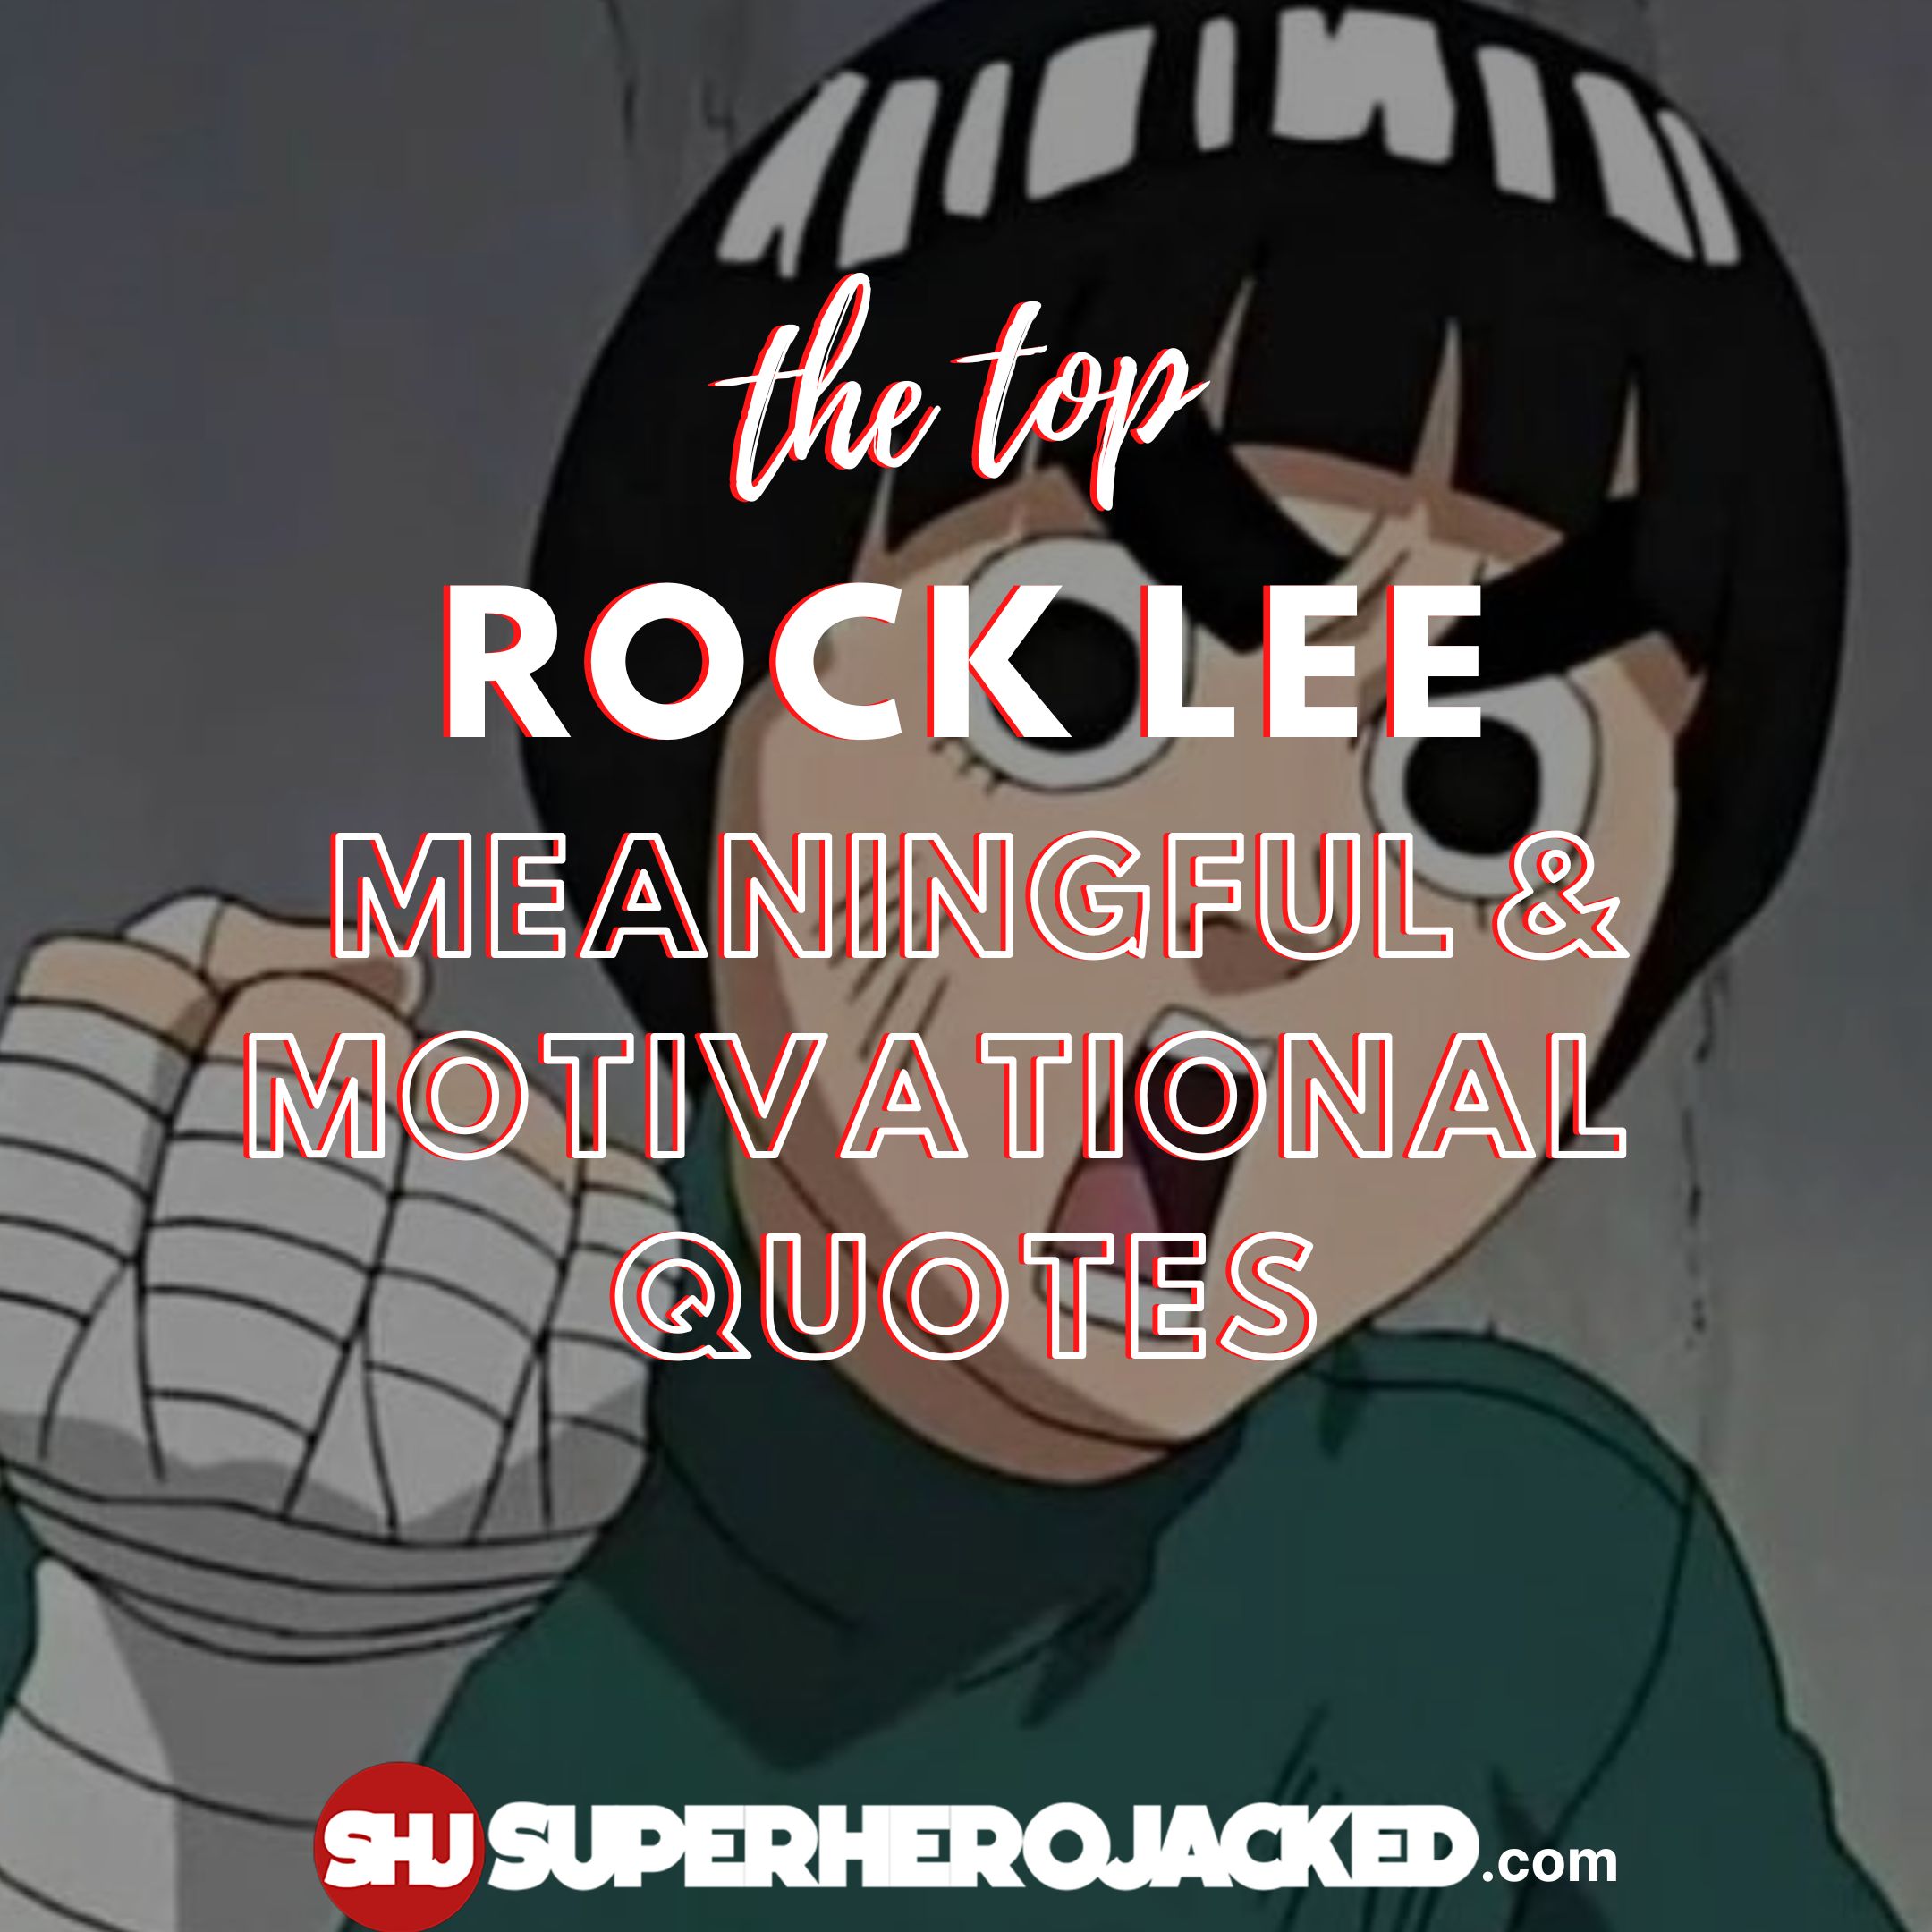 51+ Inspiring Haikyuu Quotes About Life & Pushing Yourself To The Next  Level | Anime love quotes, Anime quotes inspirational, Manga quotes